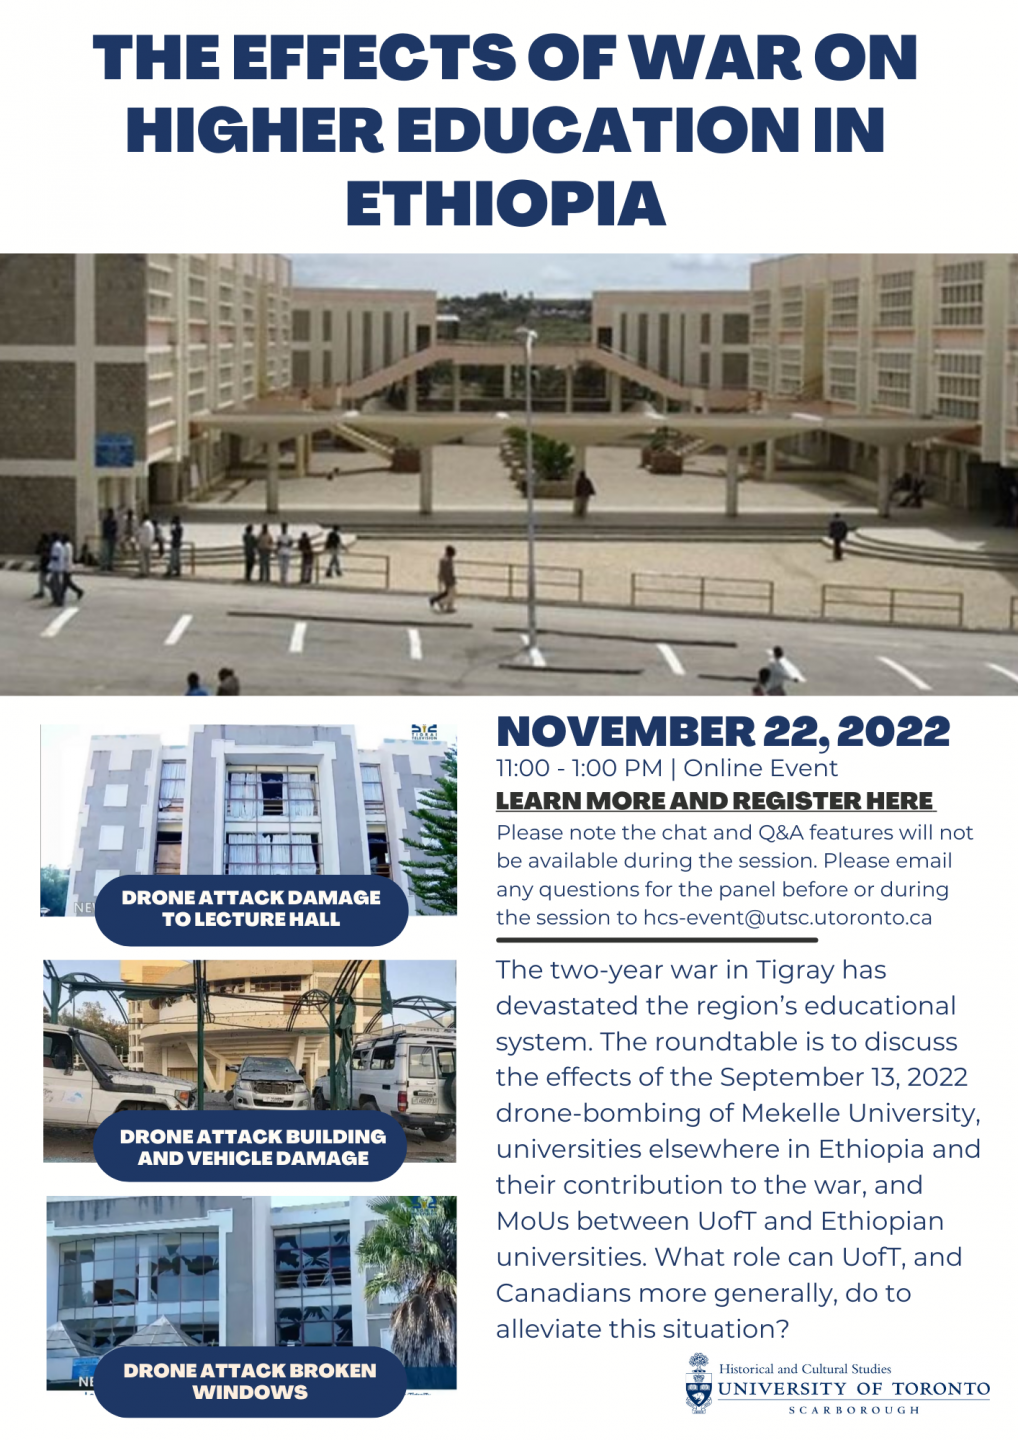 Event Poster for The Effects of War on Higher Education in Ethiopia Round Tableon November 22, 2022